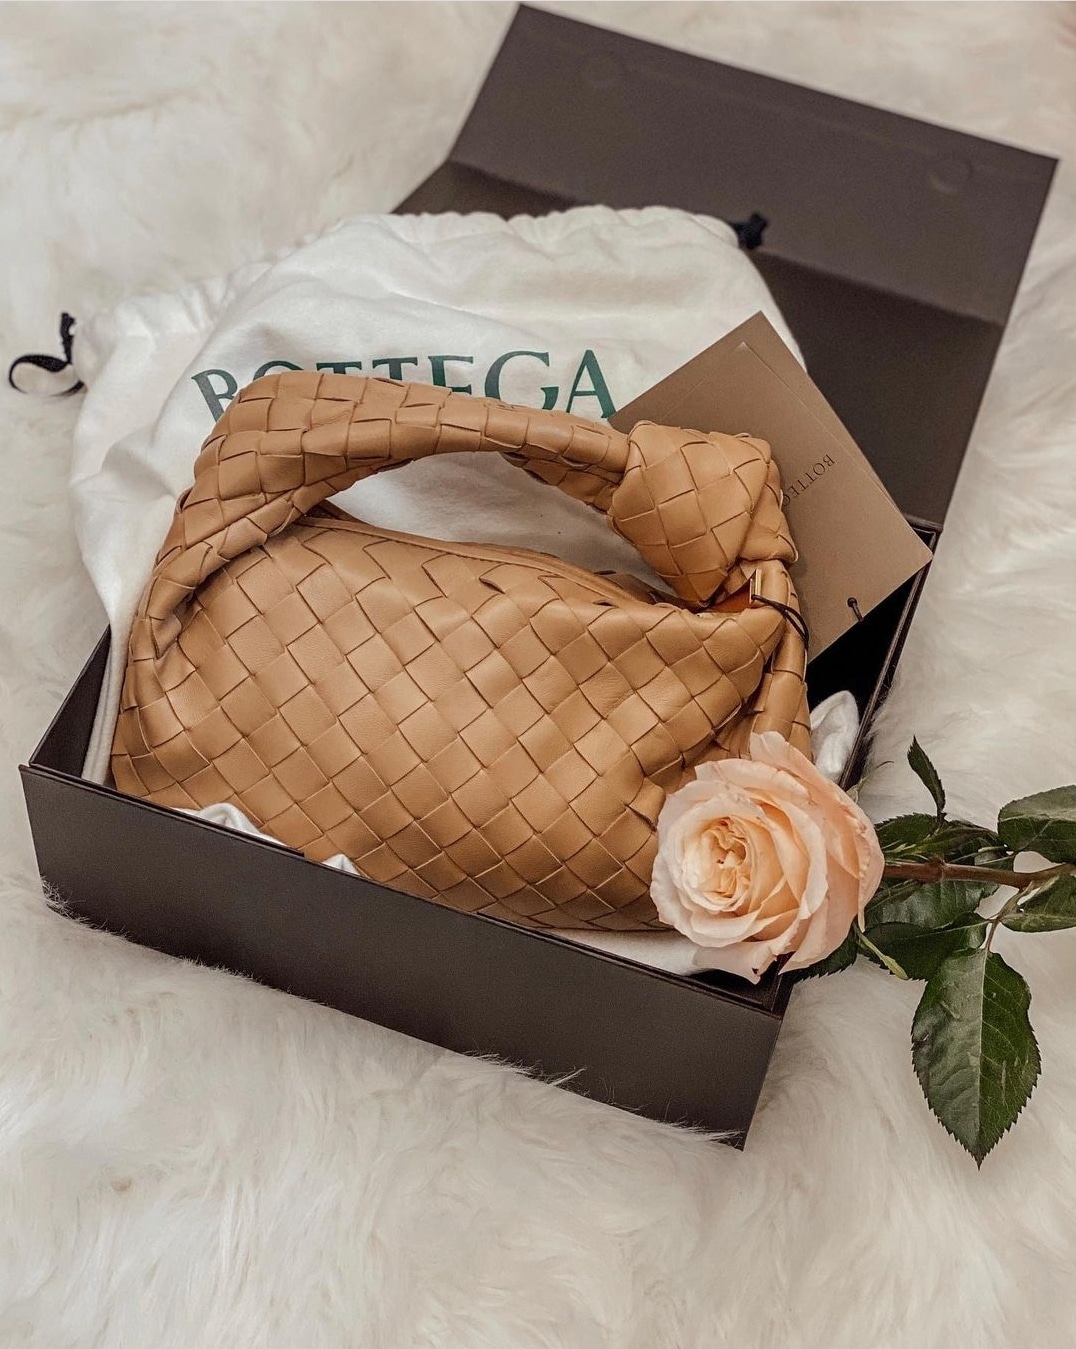 bottegaveneta's Mini Jodie bag is small but mighty – but we can't get  enough! Swipe to see how our fave influencers are styling this…